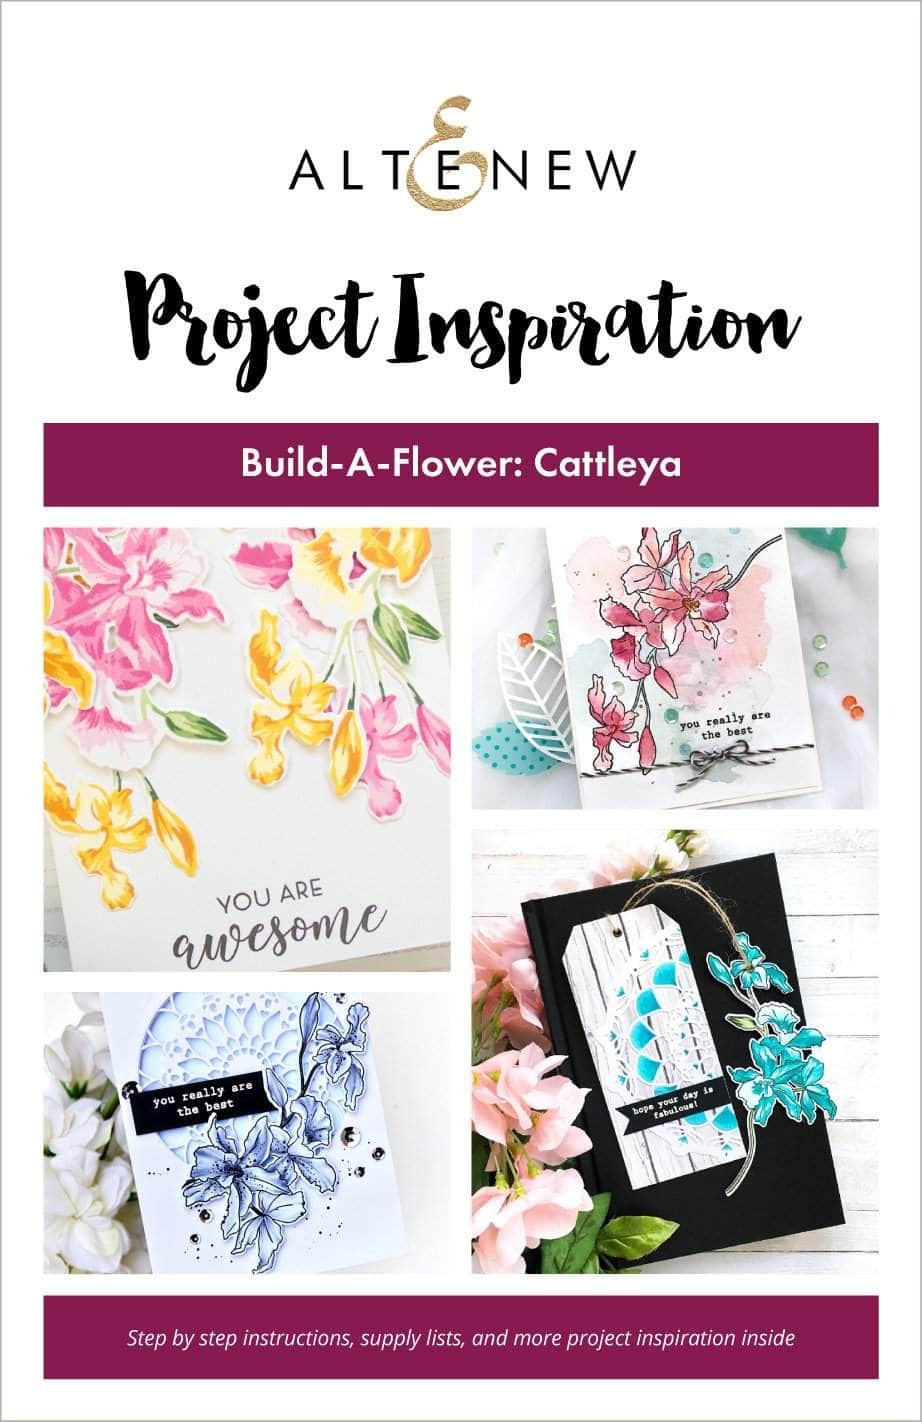 55Printing.com Printed Media Build-A-Flower: Cattleya Project Inspiration Guide